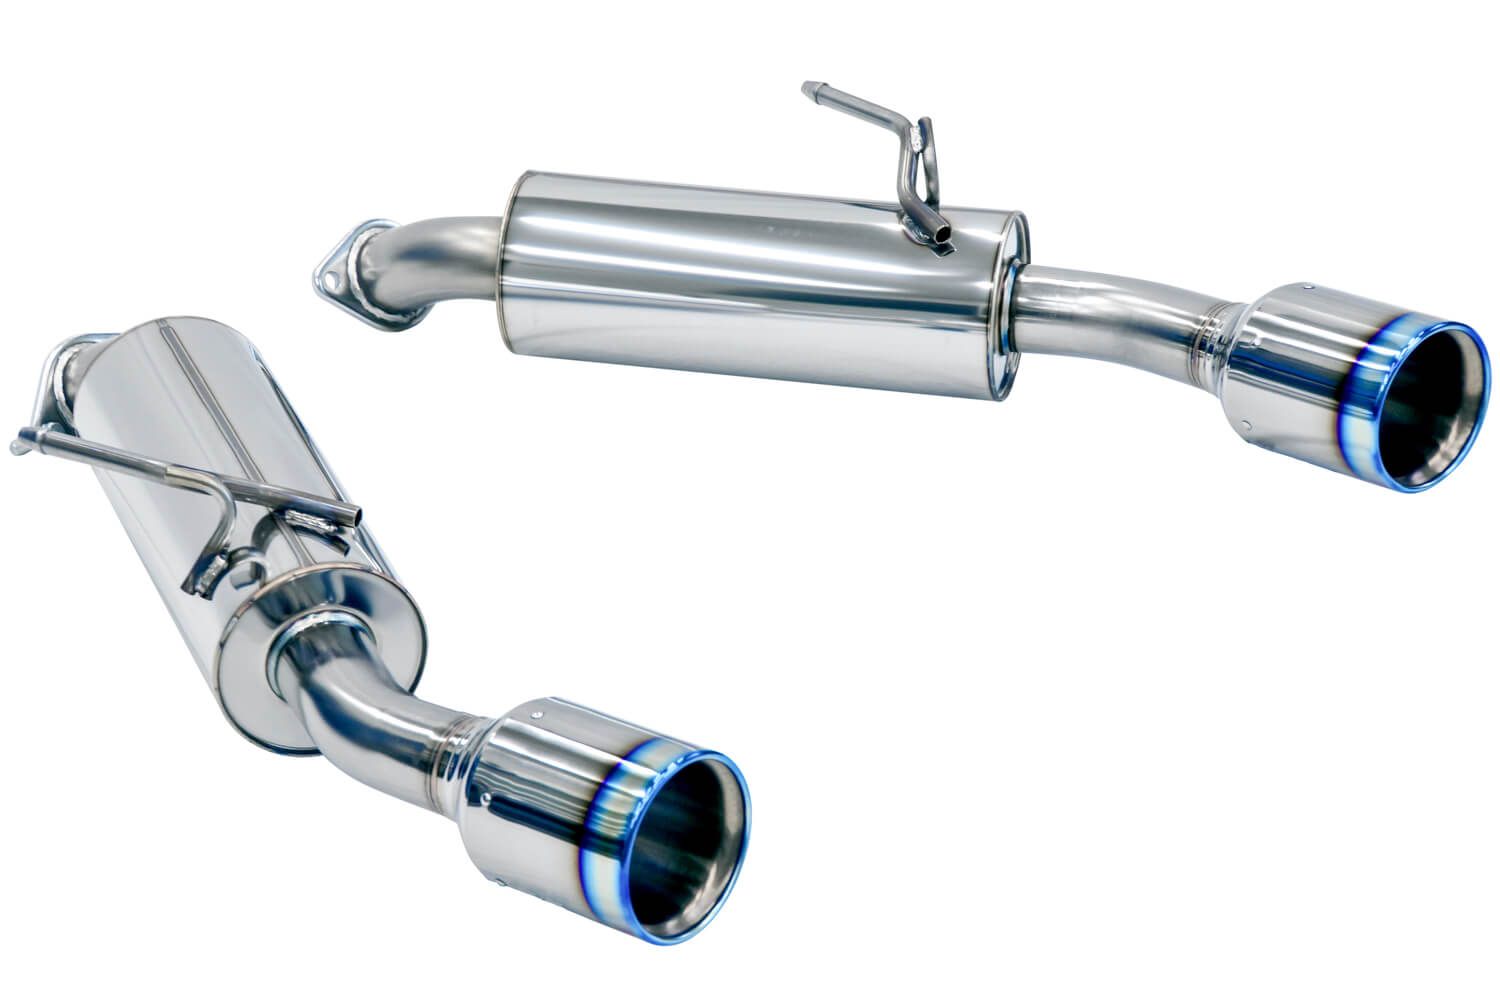 HKS Exhaust System :: Exhaust Systems & Kits - Concept Z Performance